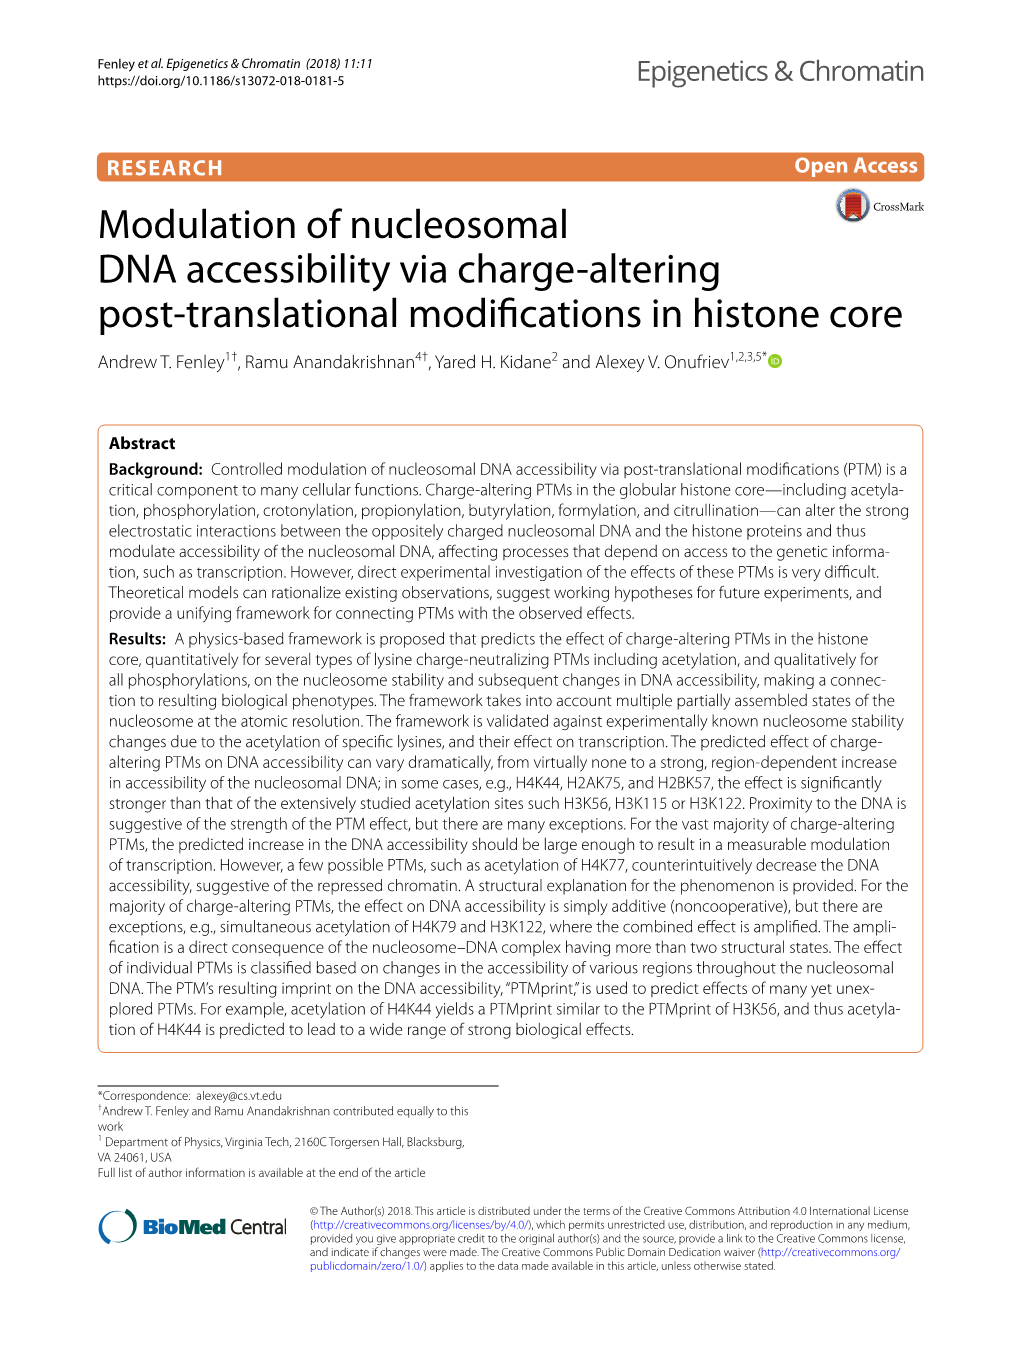 Modulation of Nucleosomal DNA Accessibility Via Charge-Altering